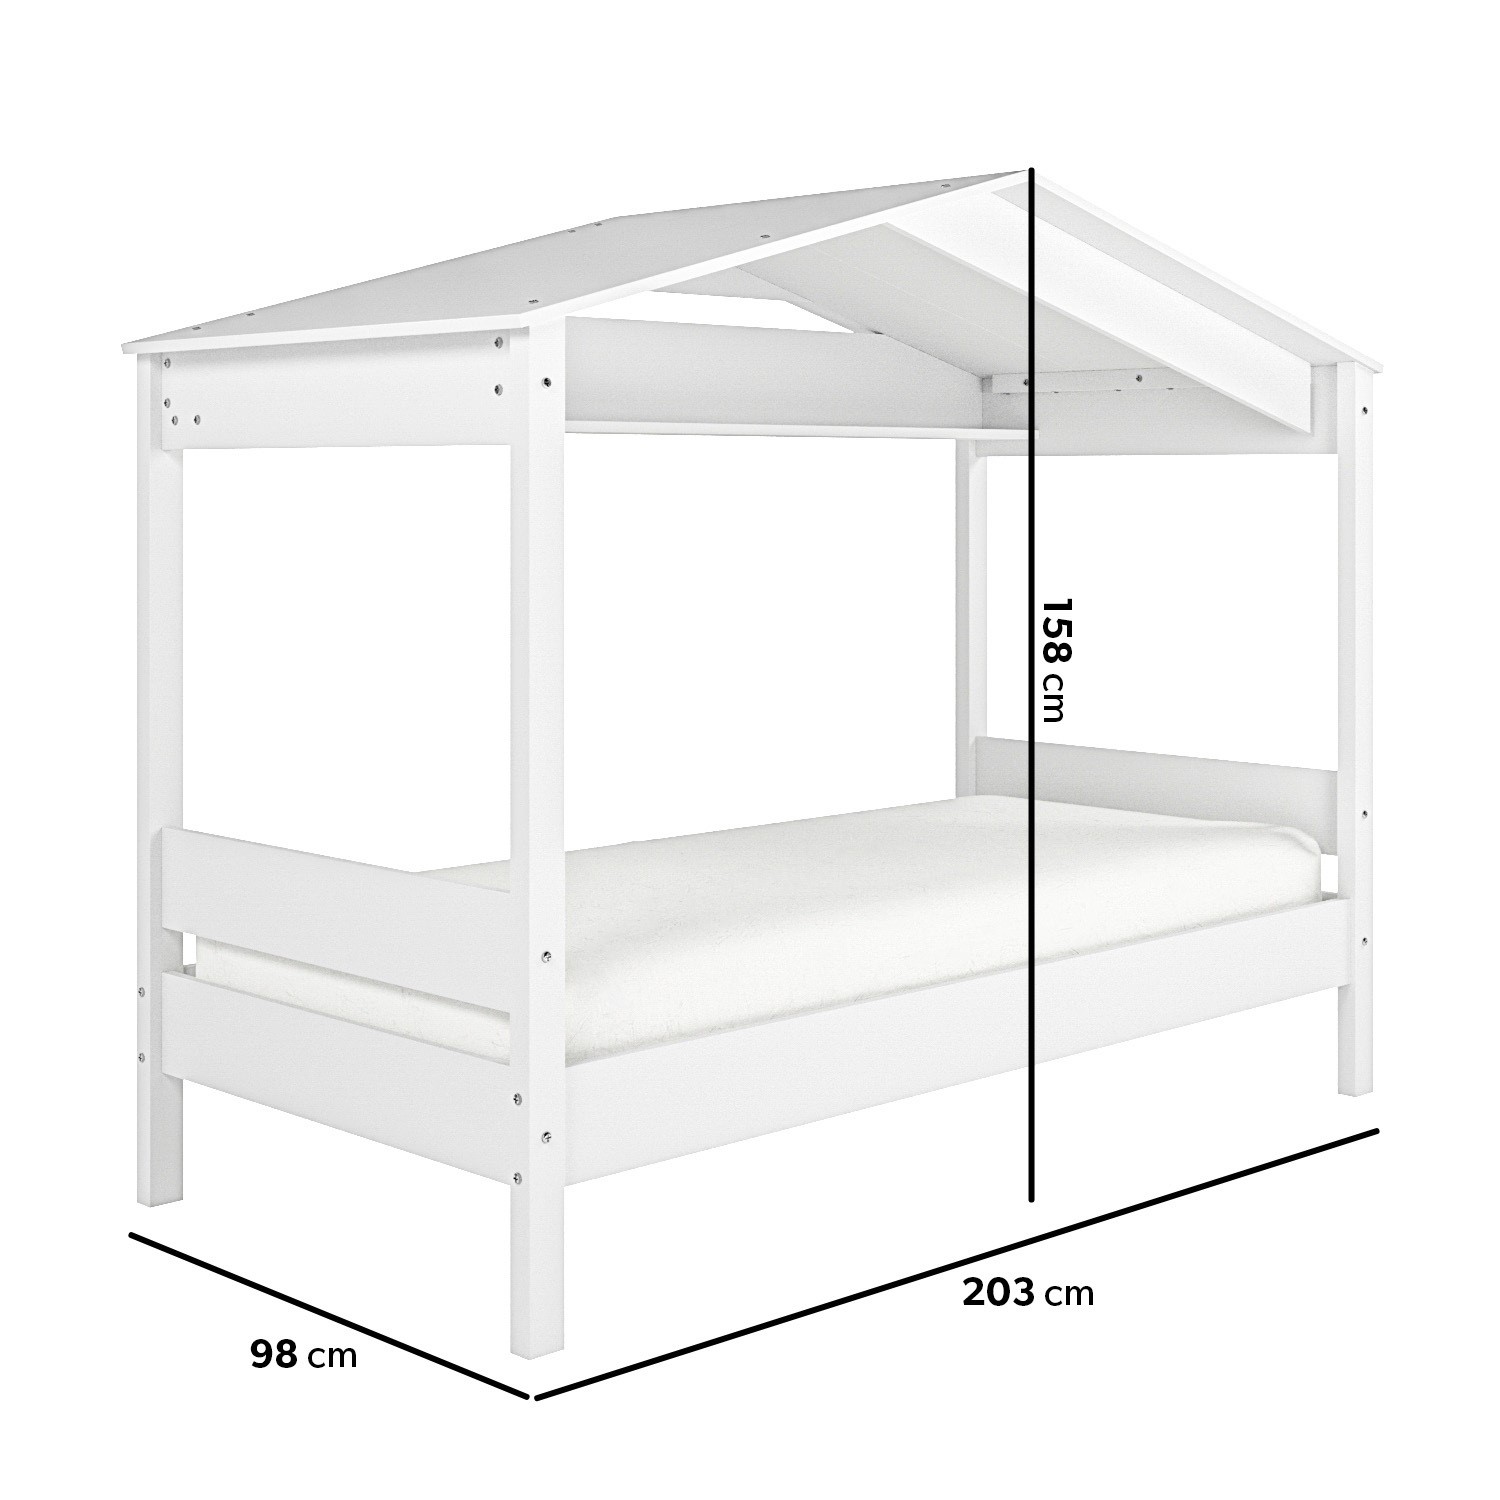 Read more about Single house bed frame in white remy